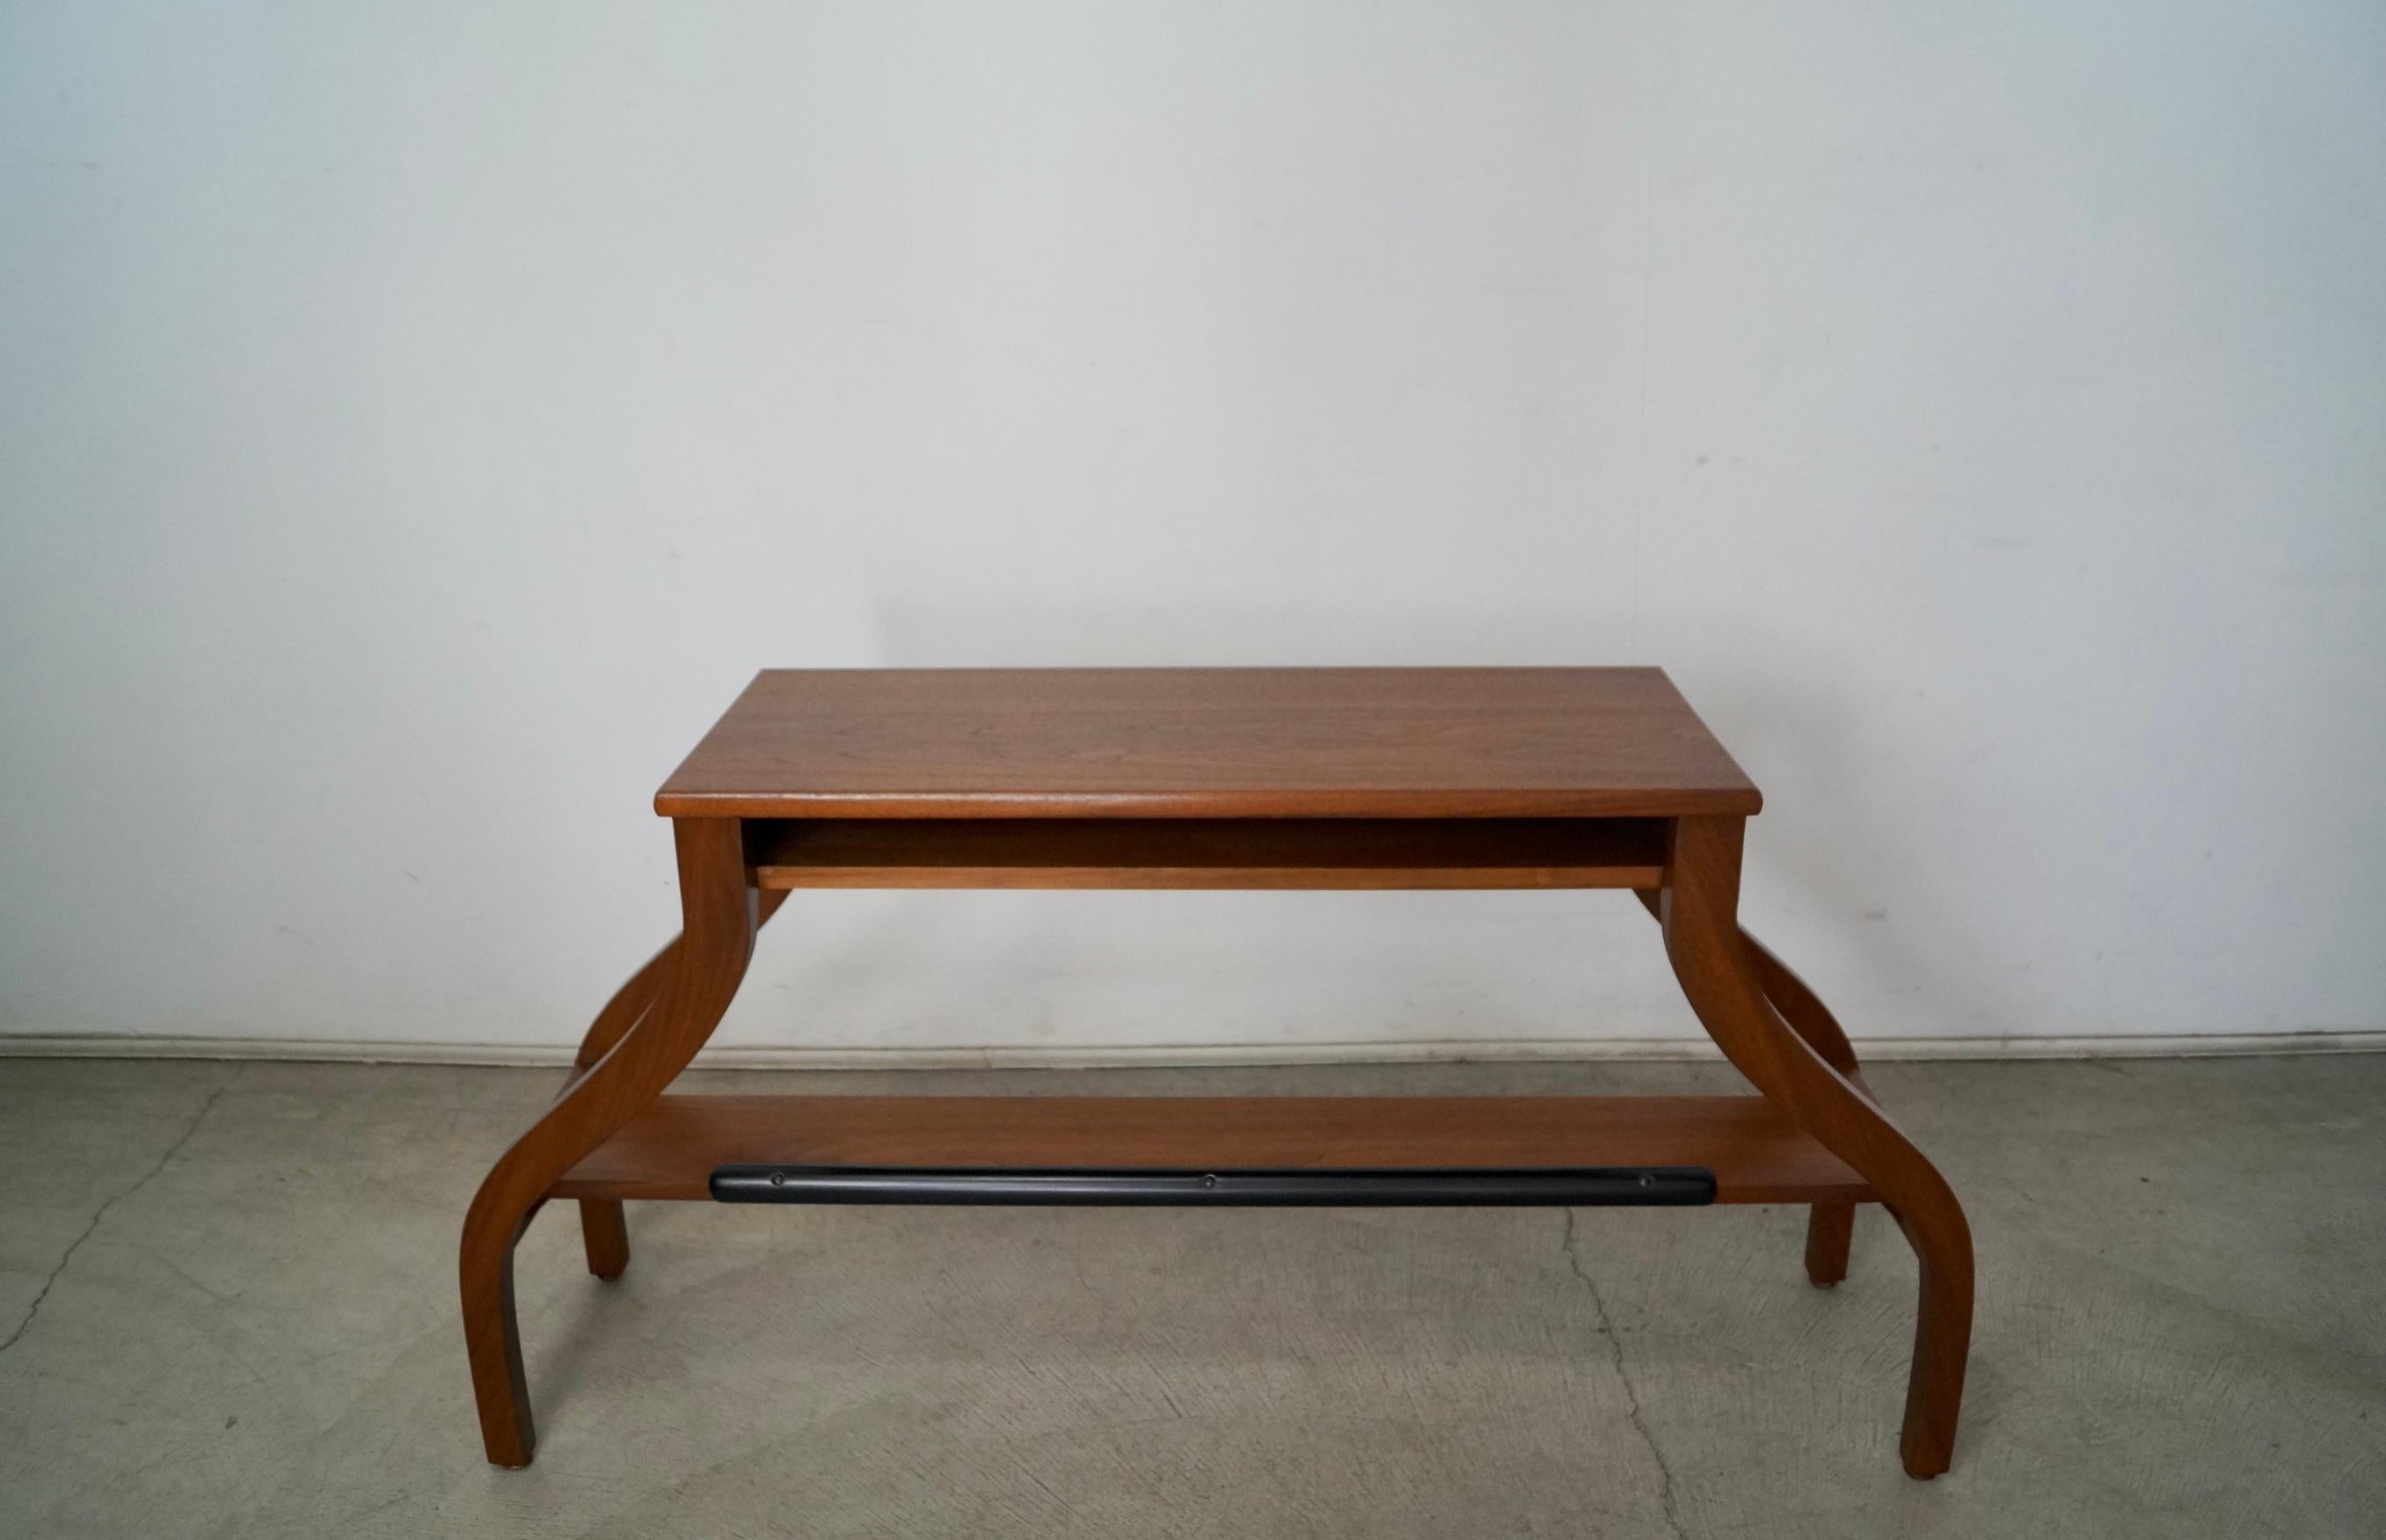 Vintage Midcentury Modern console table / shelf for sale. Made of walnut, and has been professionally refinished in a walnut finish. It has an unusual design and style with spider legs, and has a shelf underneath with a cubby hole. It can be used as